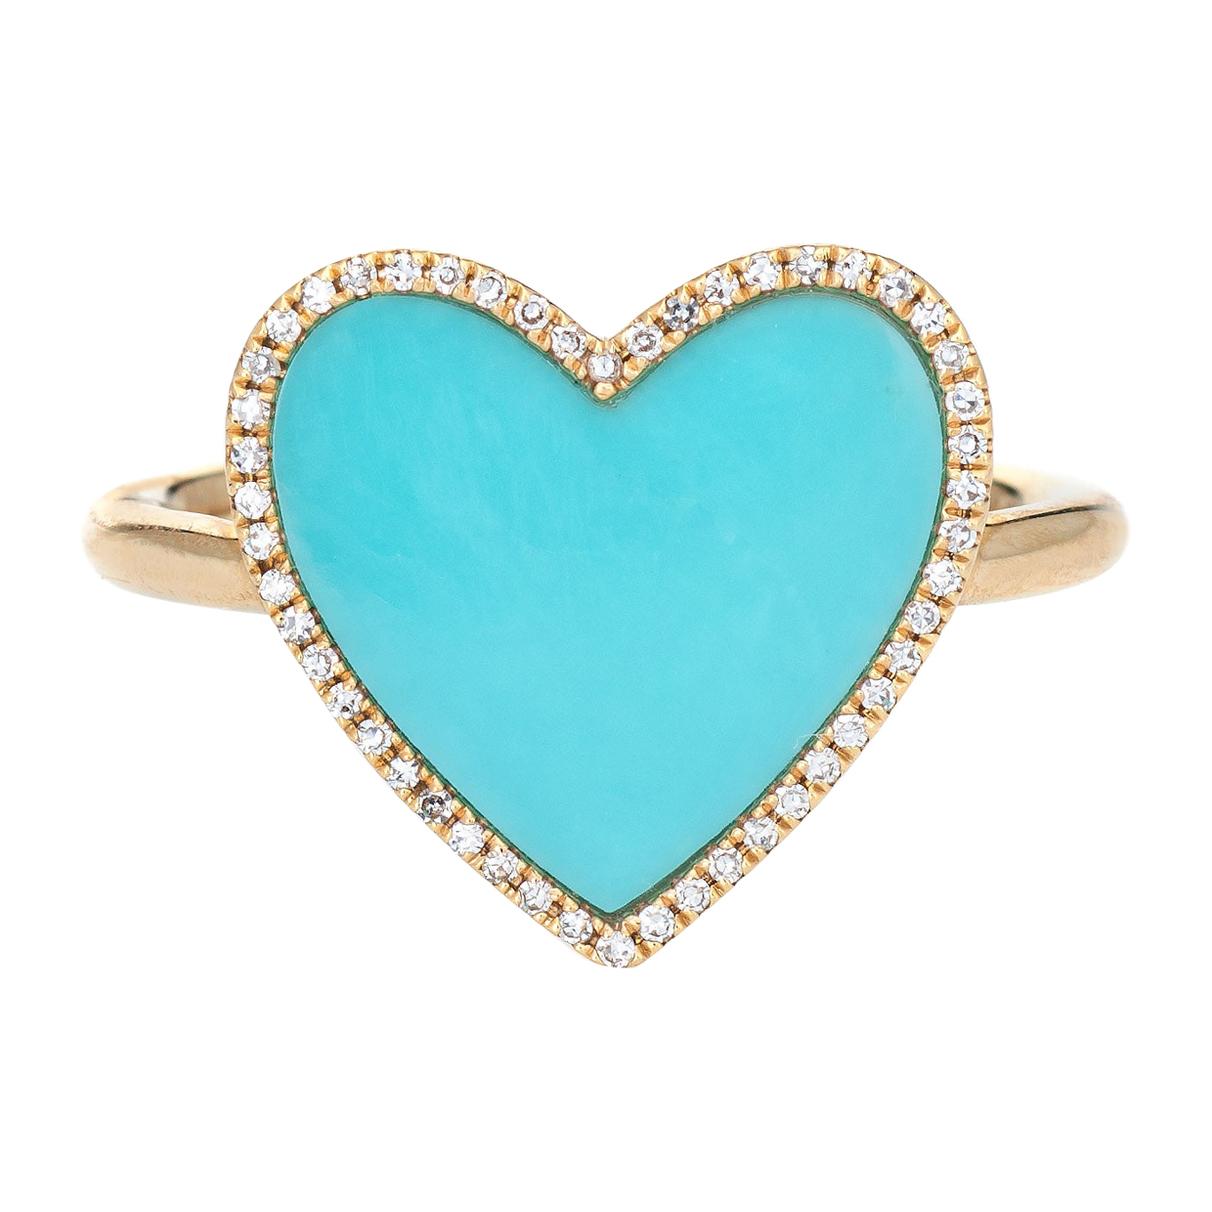 Turquoise Diamond Heart Ring Estate 14k Yellow Gold Large Cocktail Jewelry